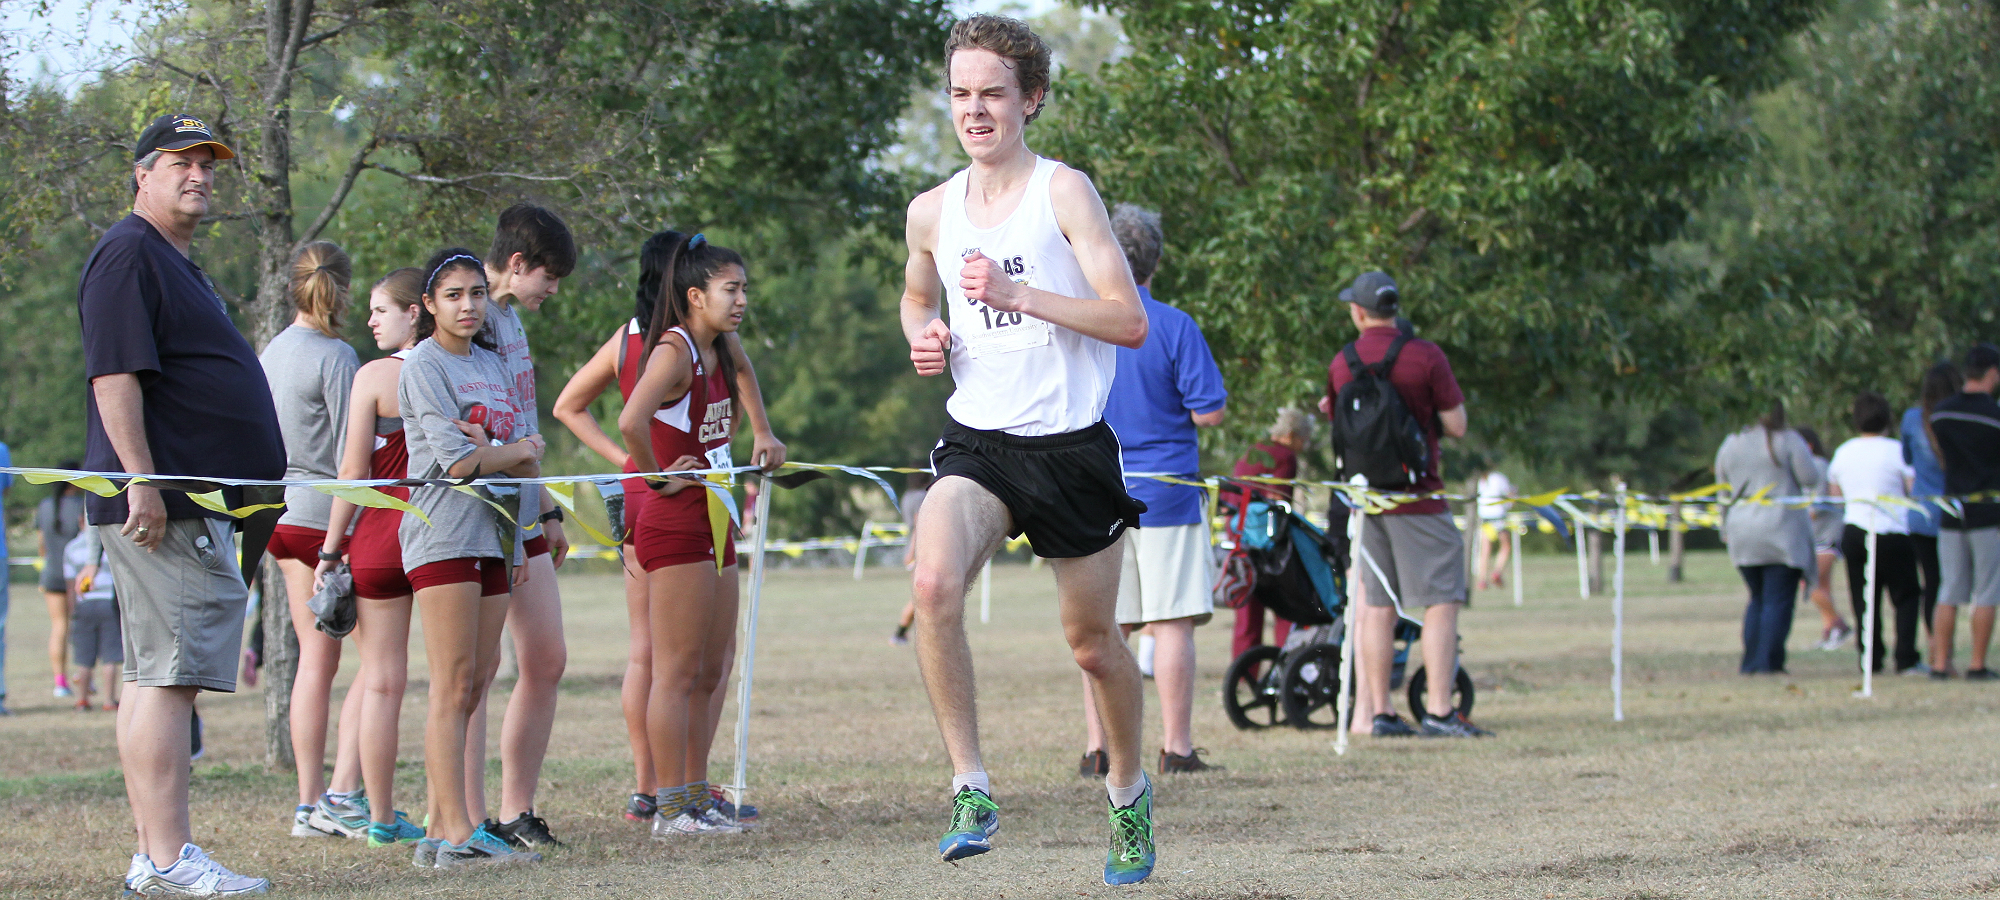 Men's Cross Country 5th in SCAC Championship